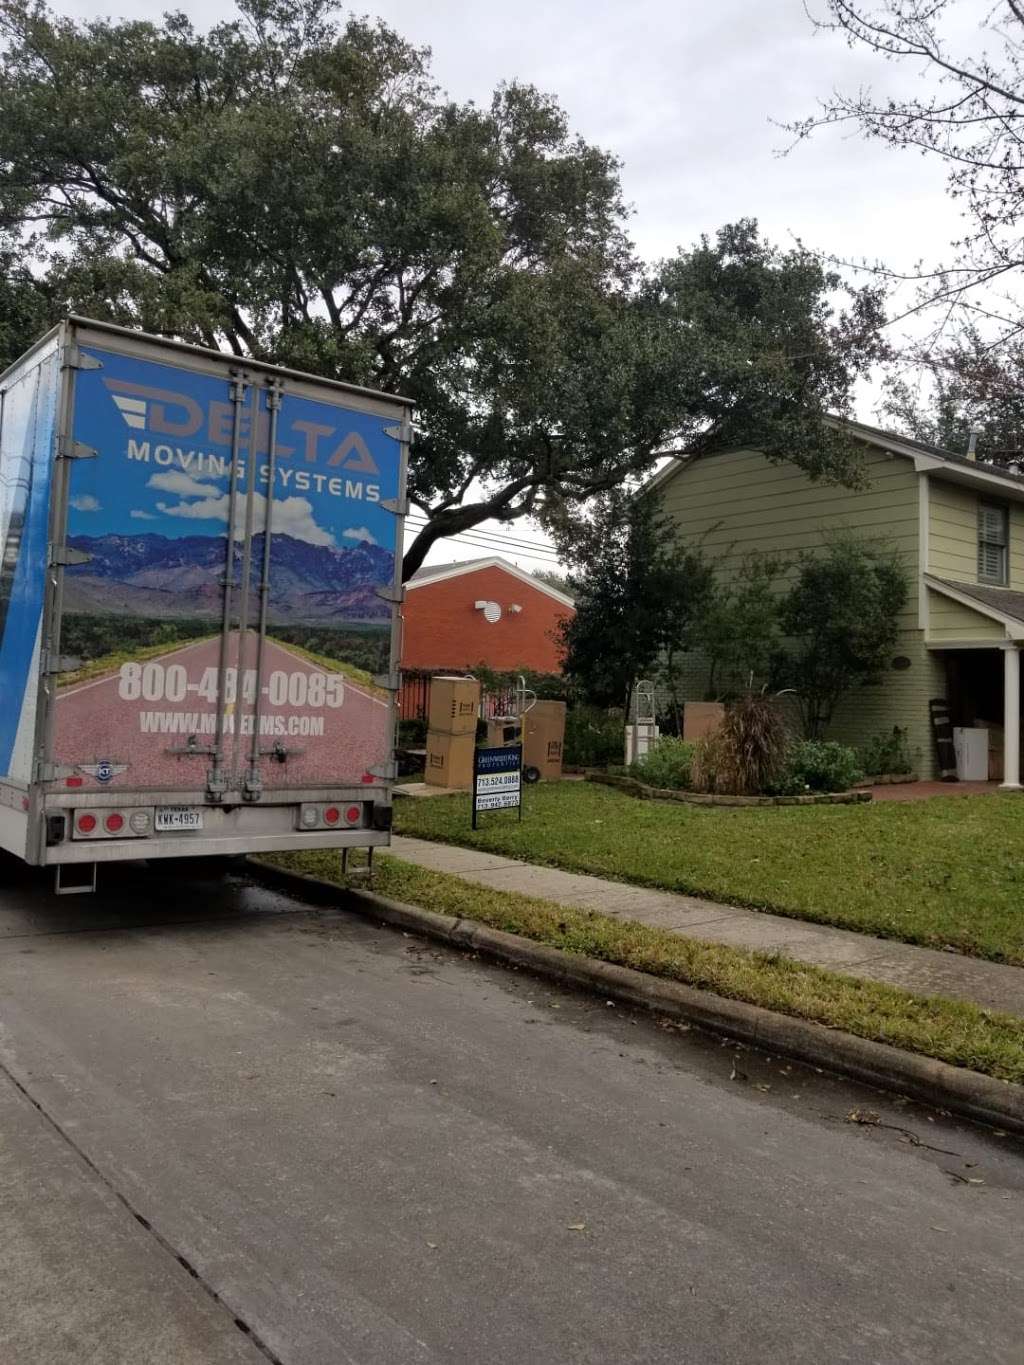 Delta Moving Systems | 549 W 38th St, Houston, TX 77018, USA | Phone: (800) 484-0085